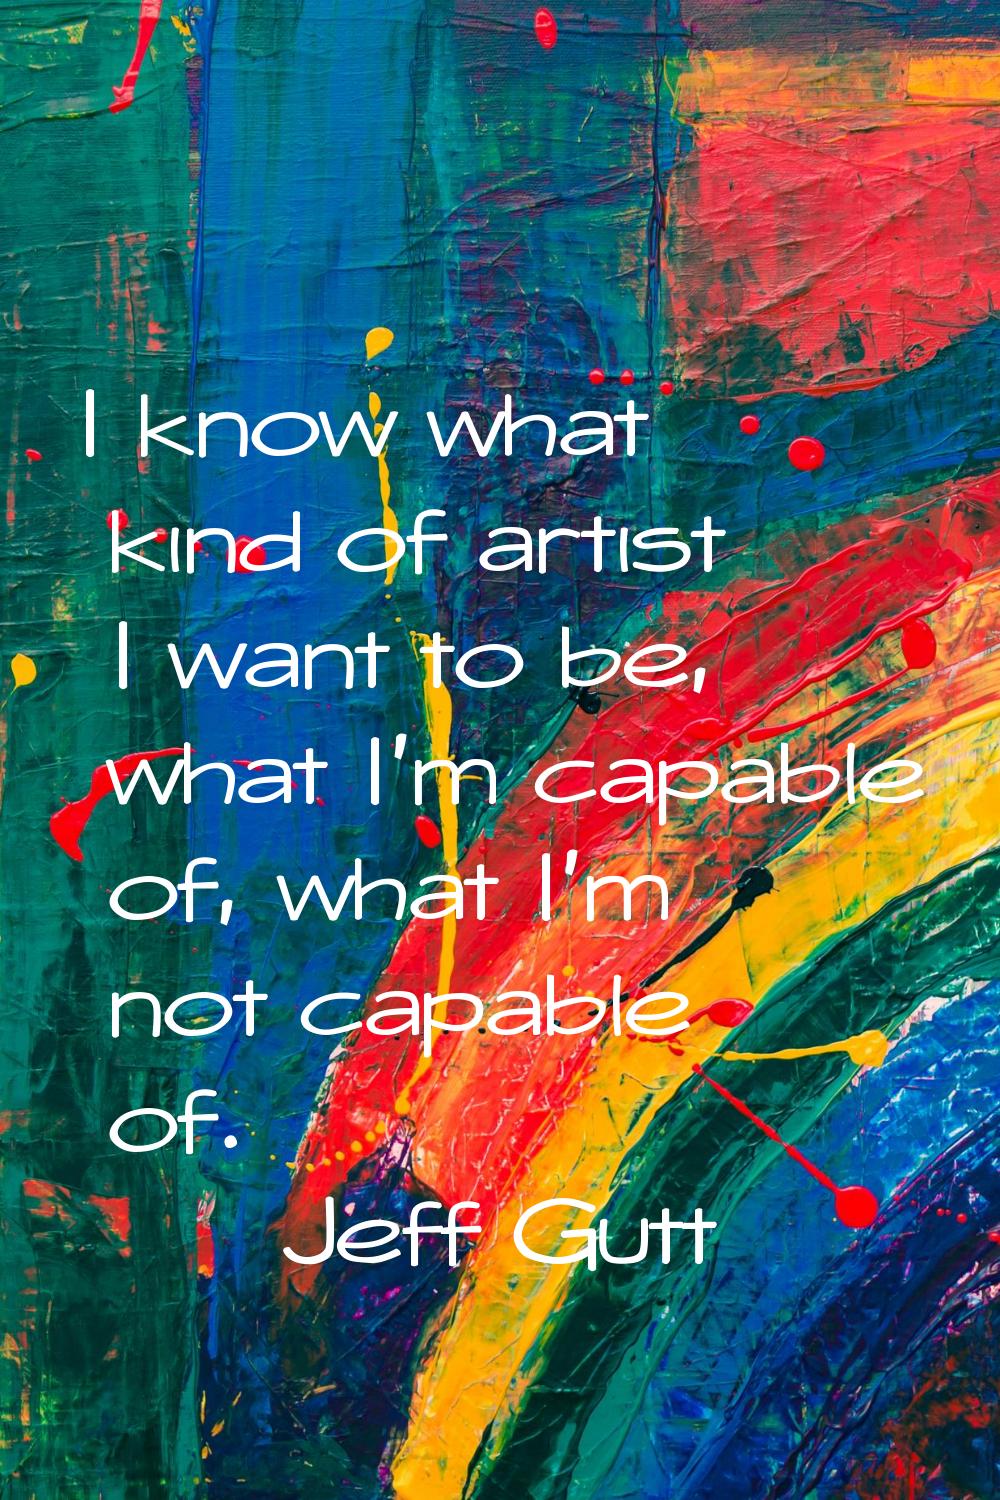 I know what kind of artist I want to be, what I'm capable of, what I'm not capable of.